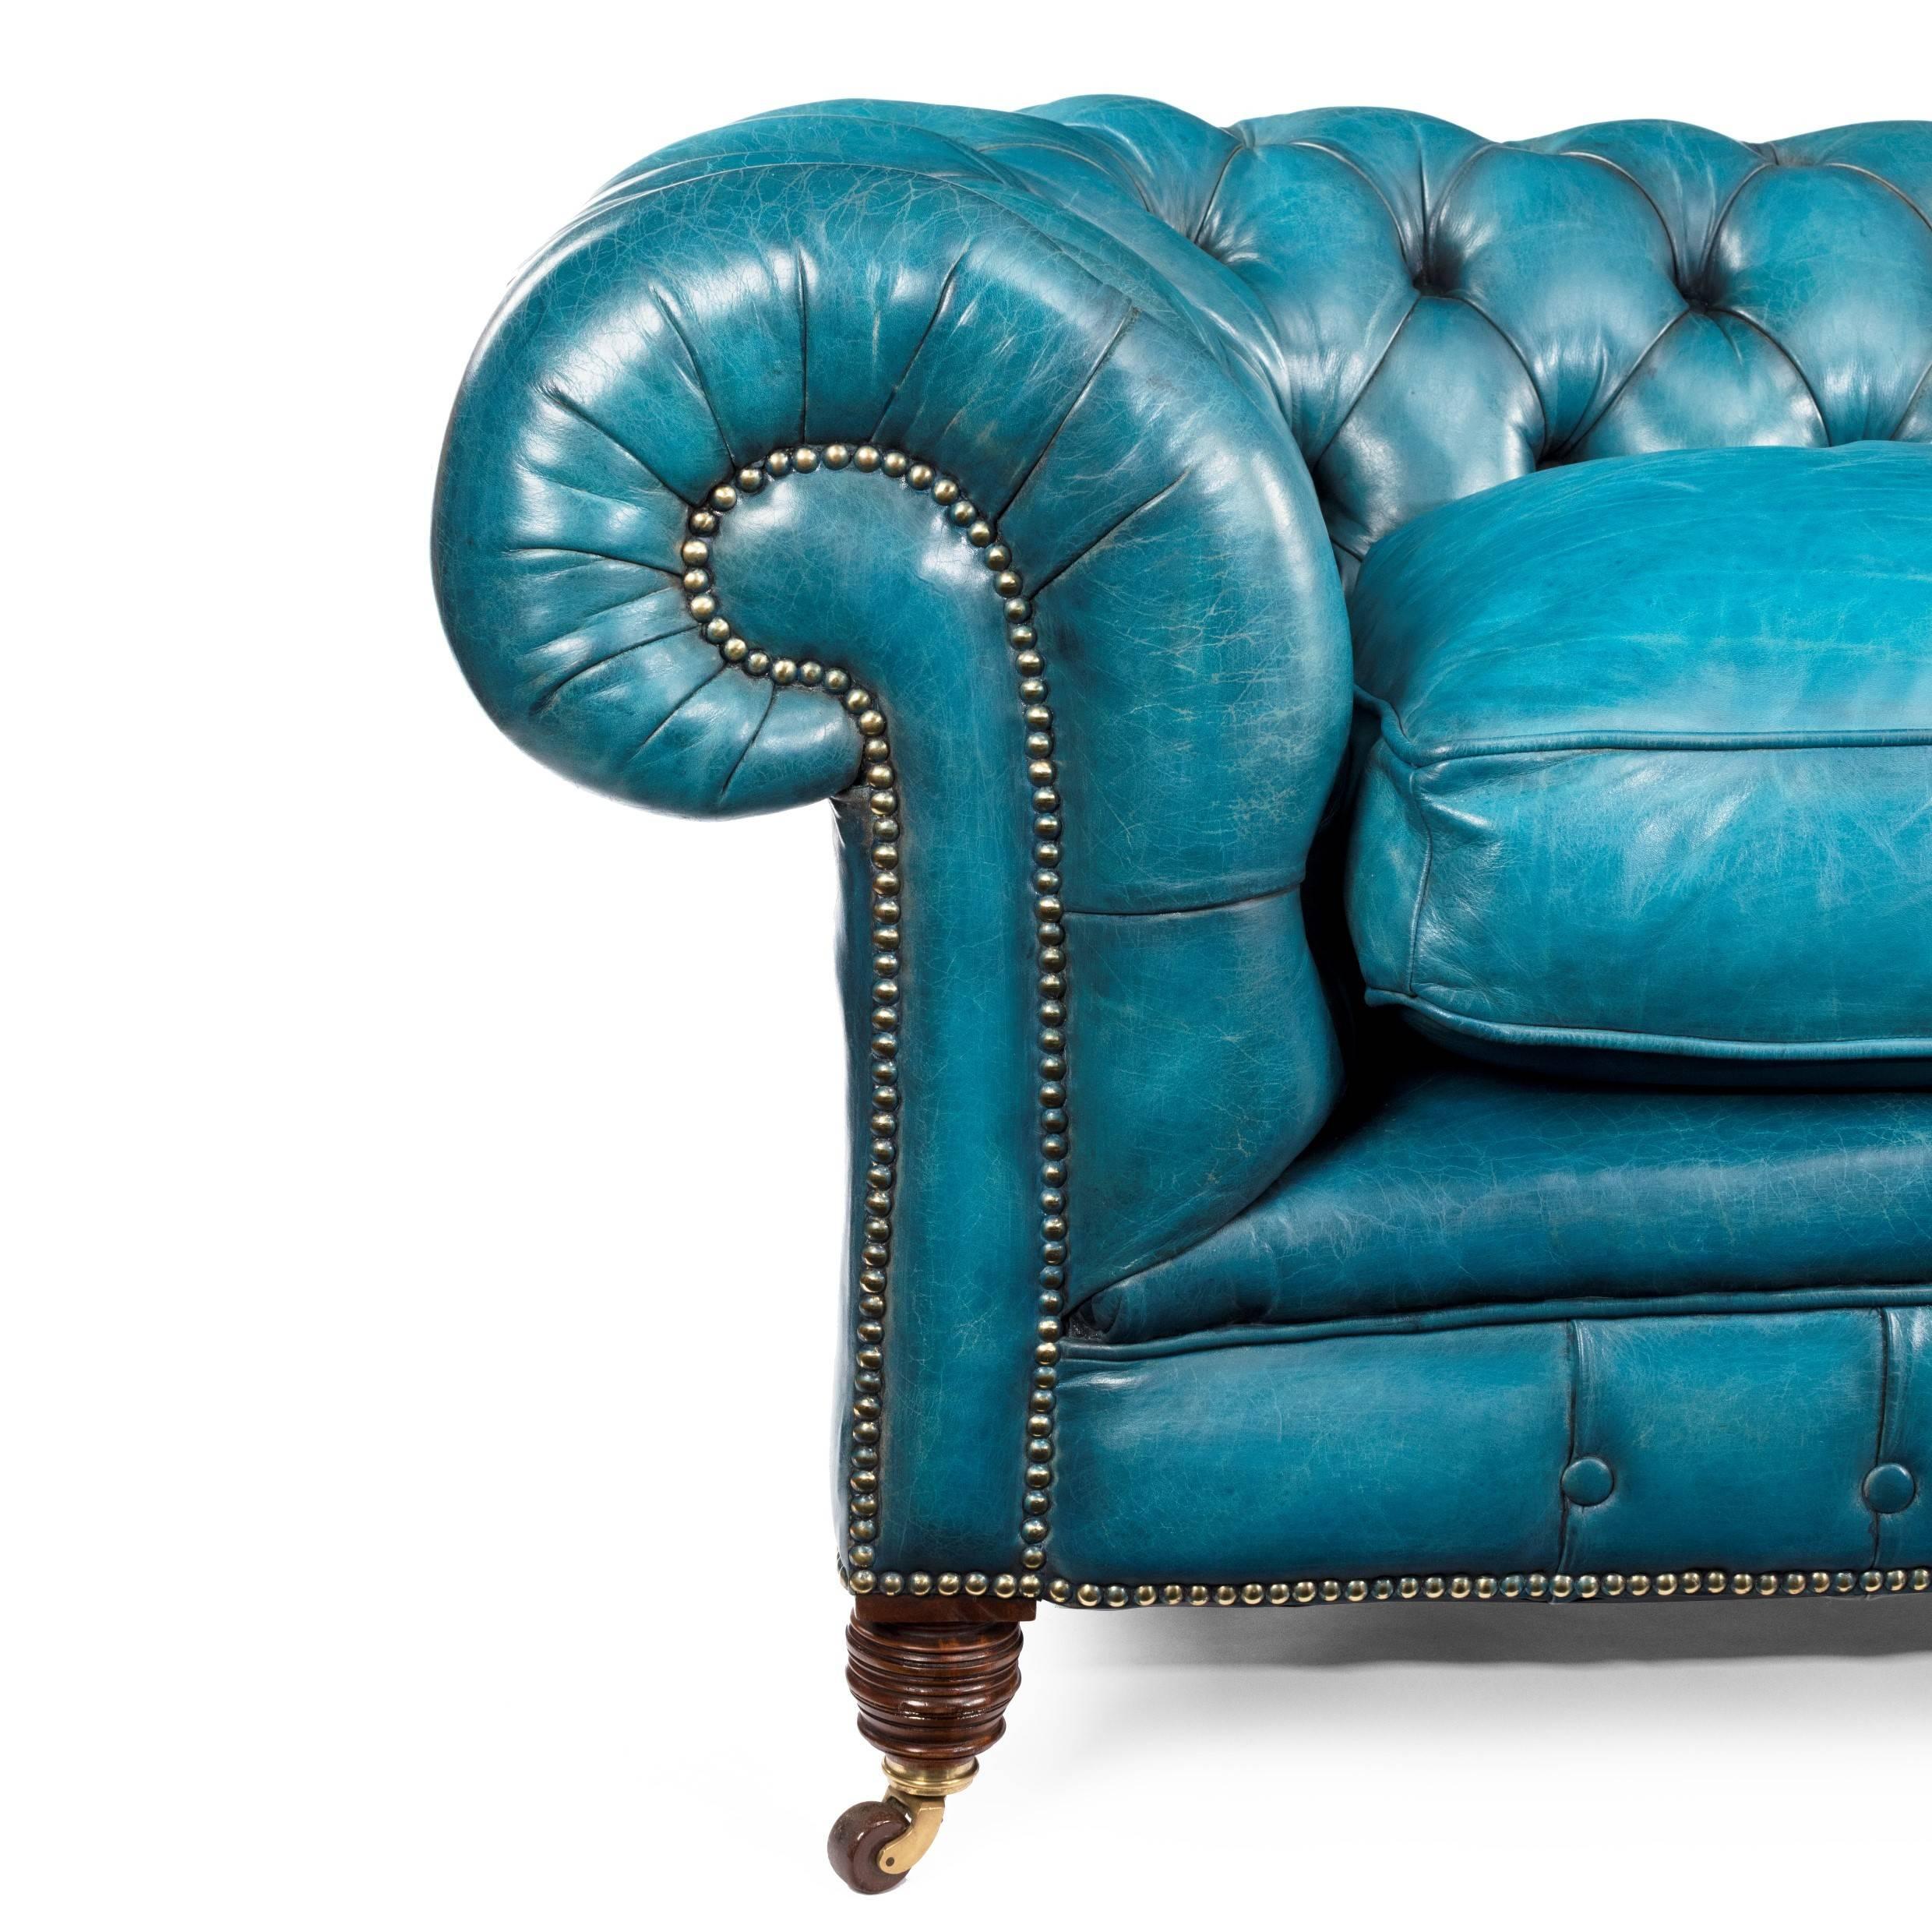 Late Victorian Chesterfield sofa with walnut legs, of typical form with deep seats and rolled arms and back, re-upholstered in deep buttoned turquoise leather.